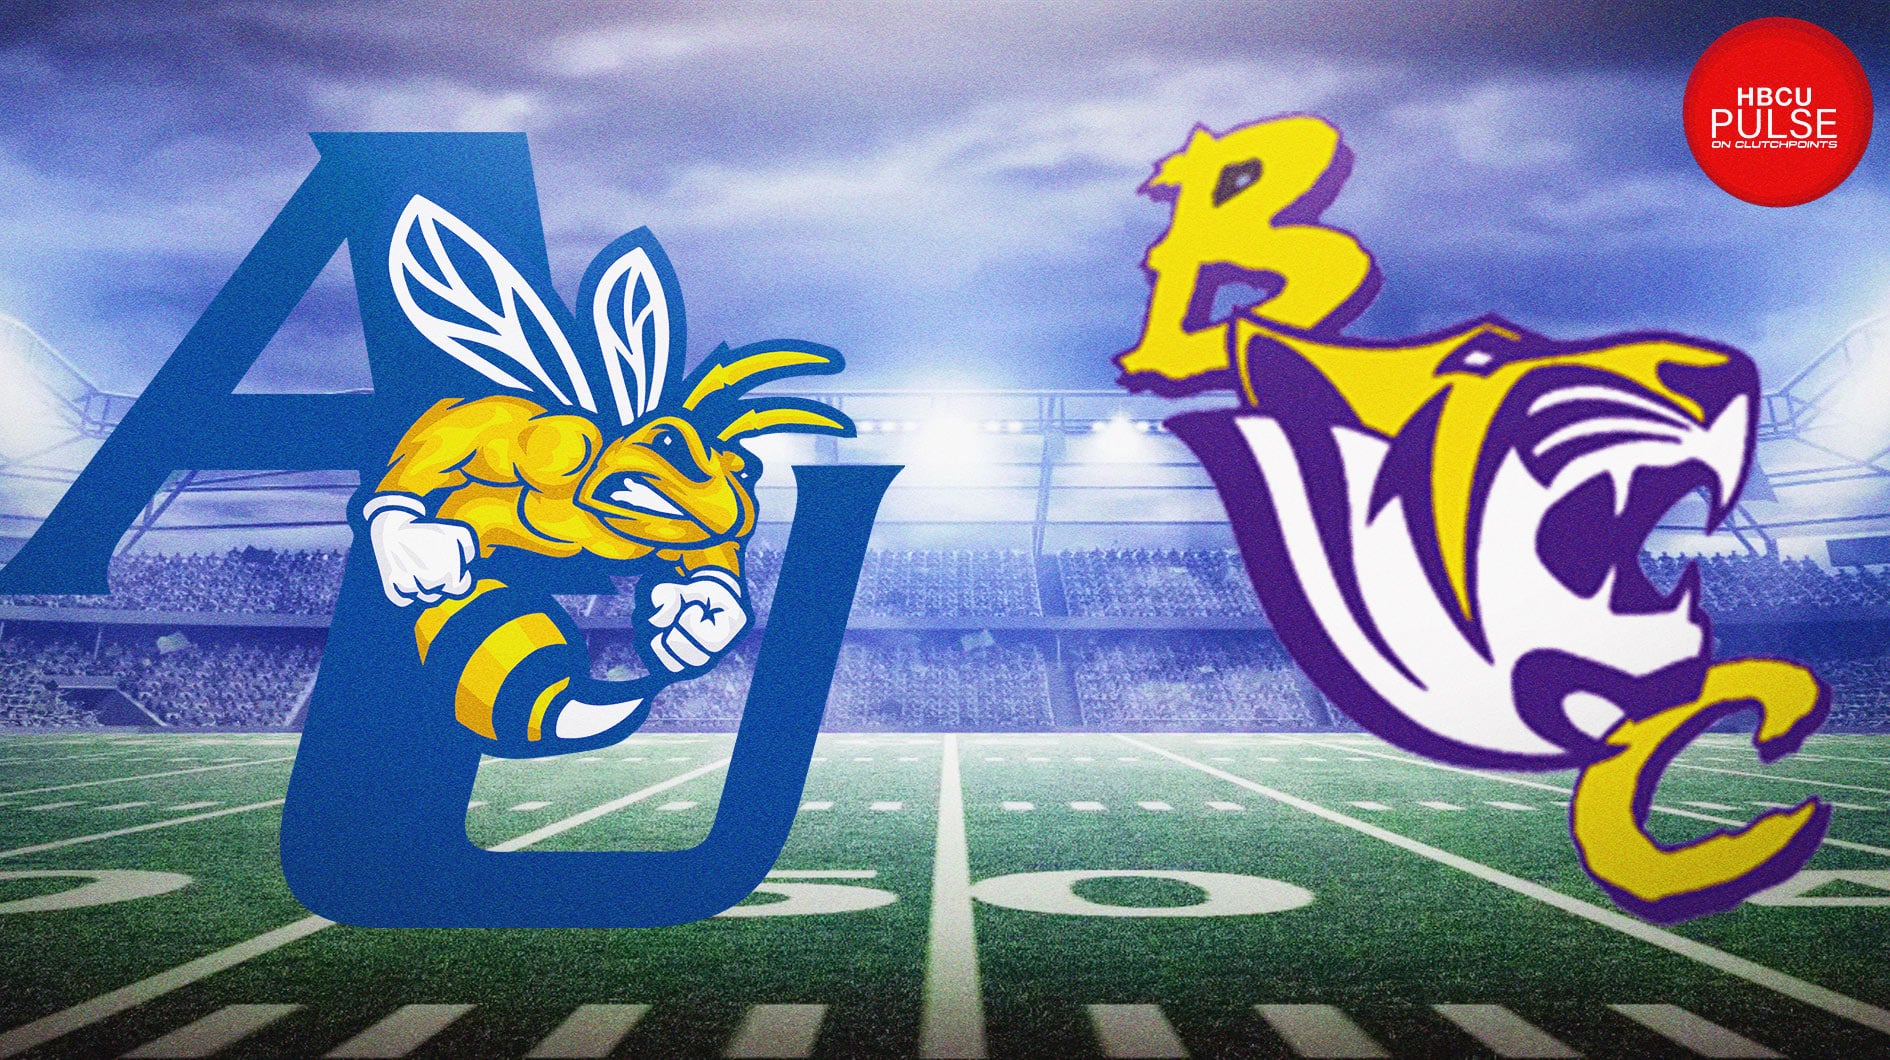 Benedict College is on the verge of a second undefeated season but they face in-state rival Allen University, who has a prolific offense.